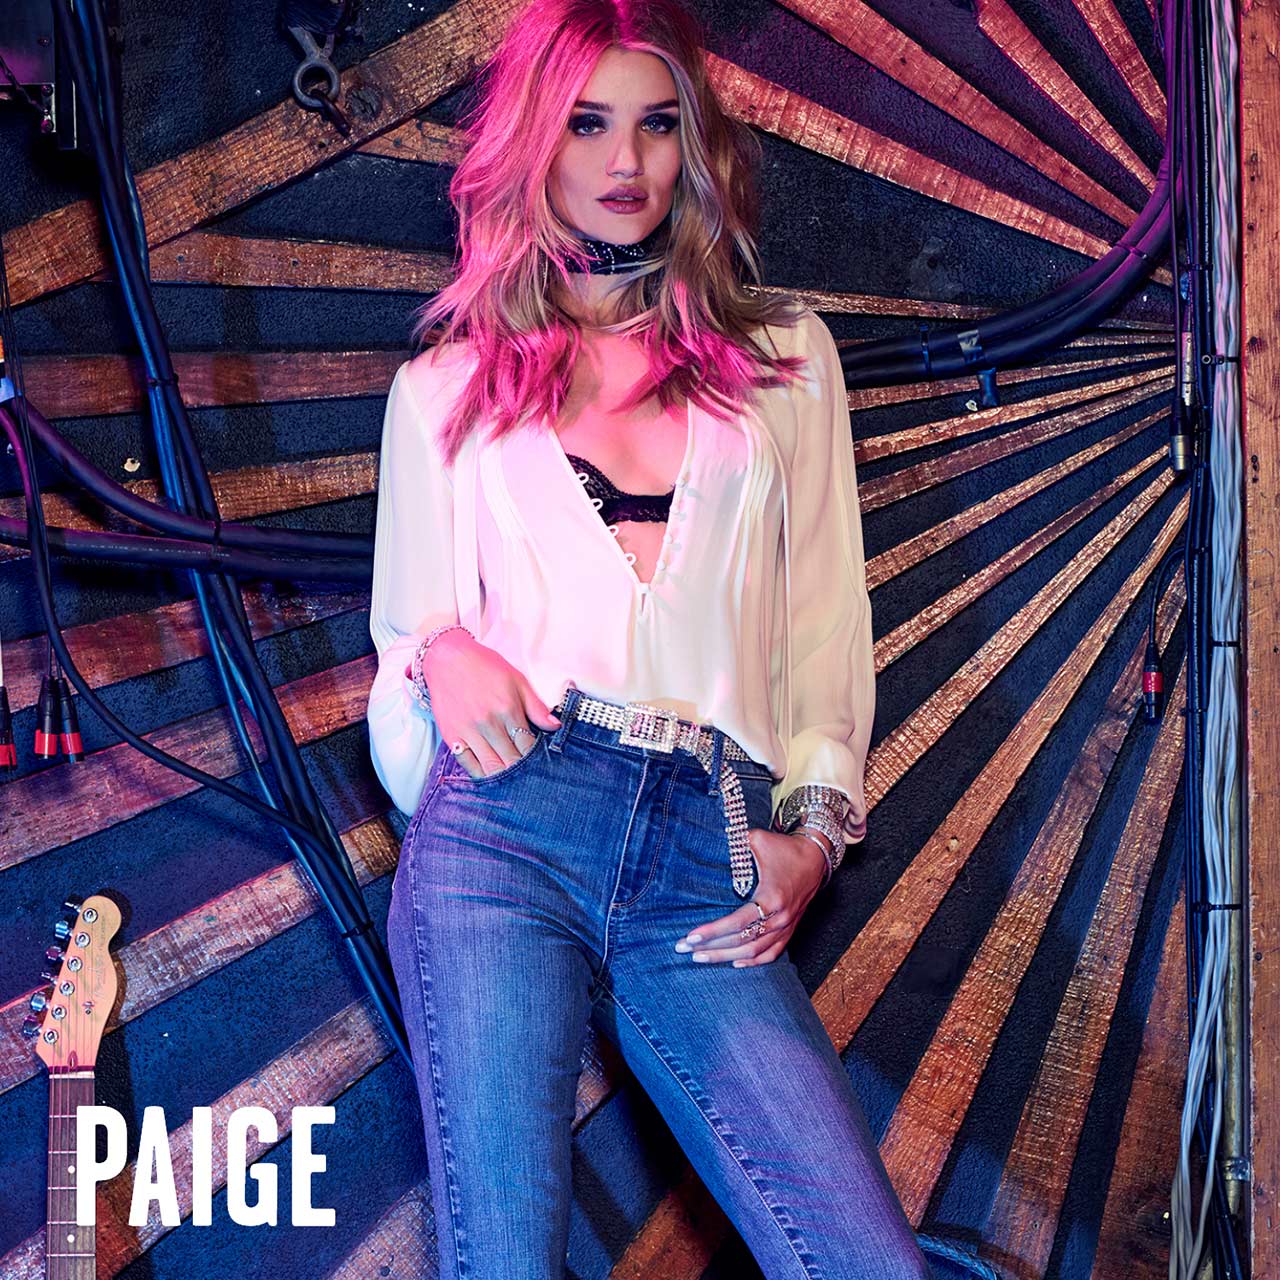 Paige-Rosie-Huntington-Whiteley-Fall-16-Insta-Images4